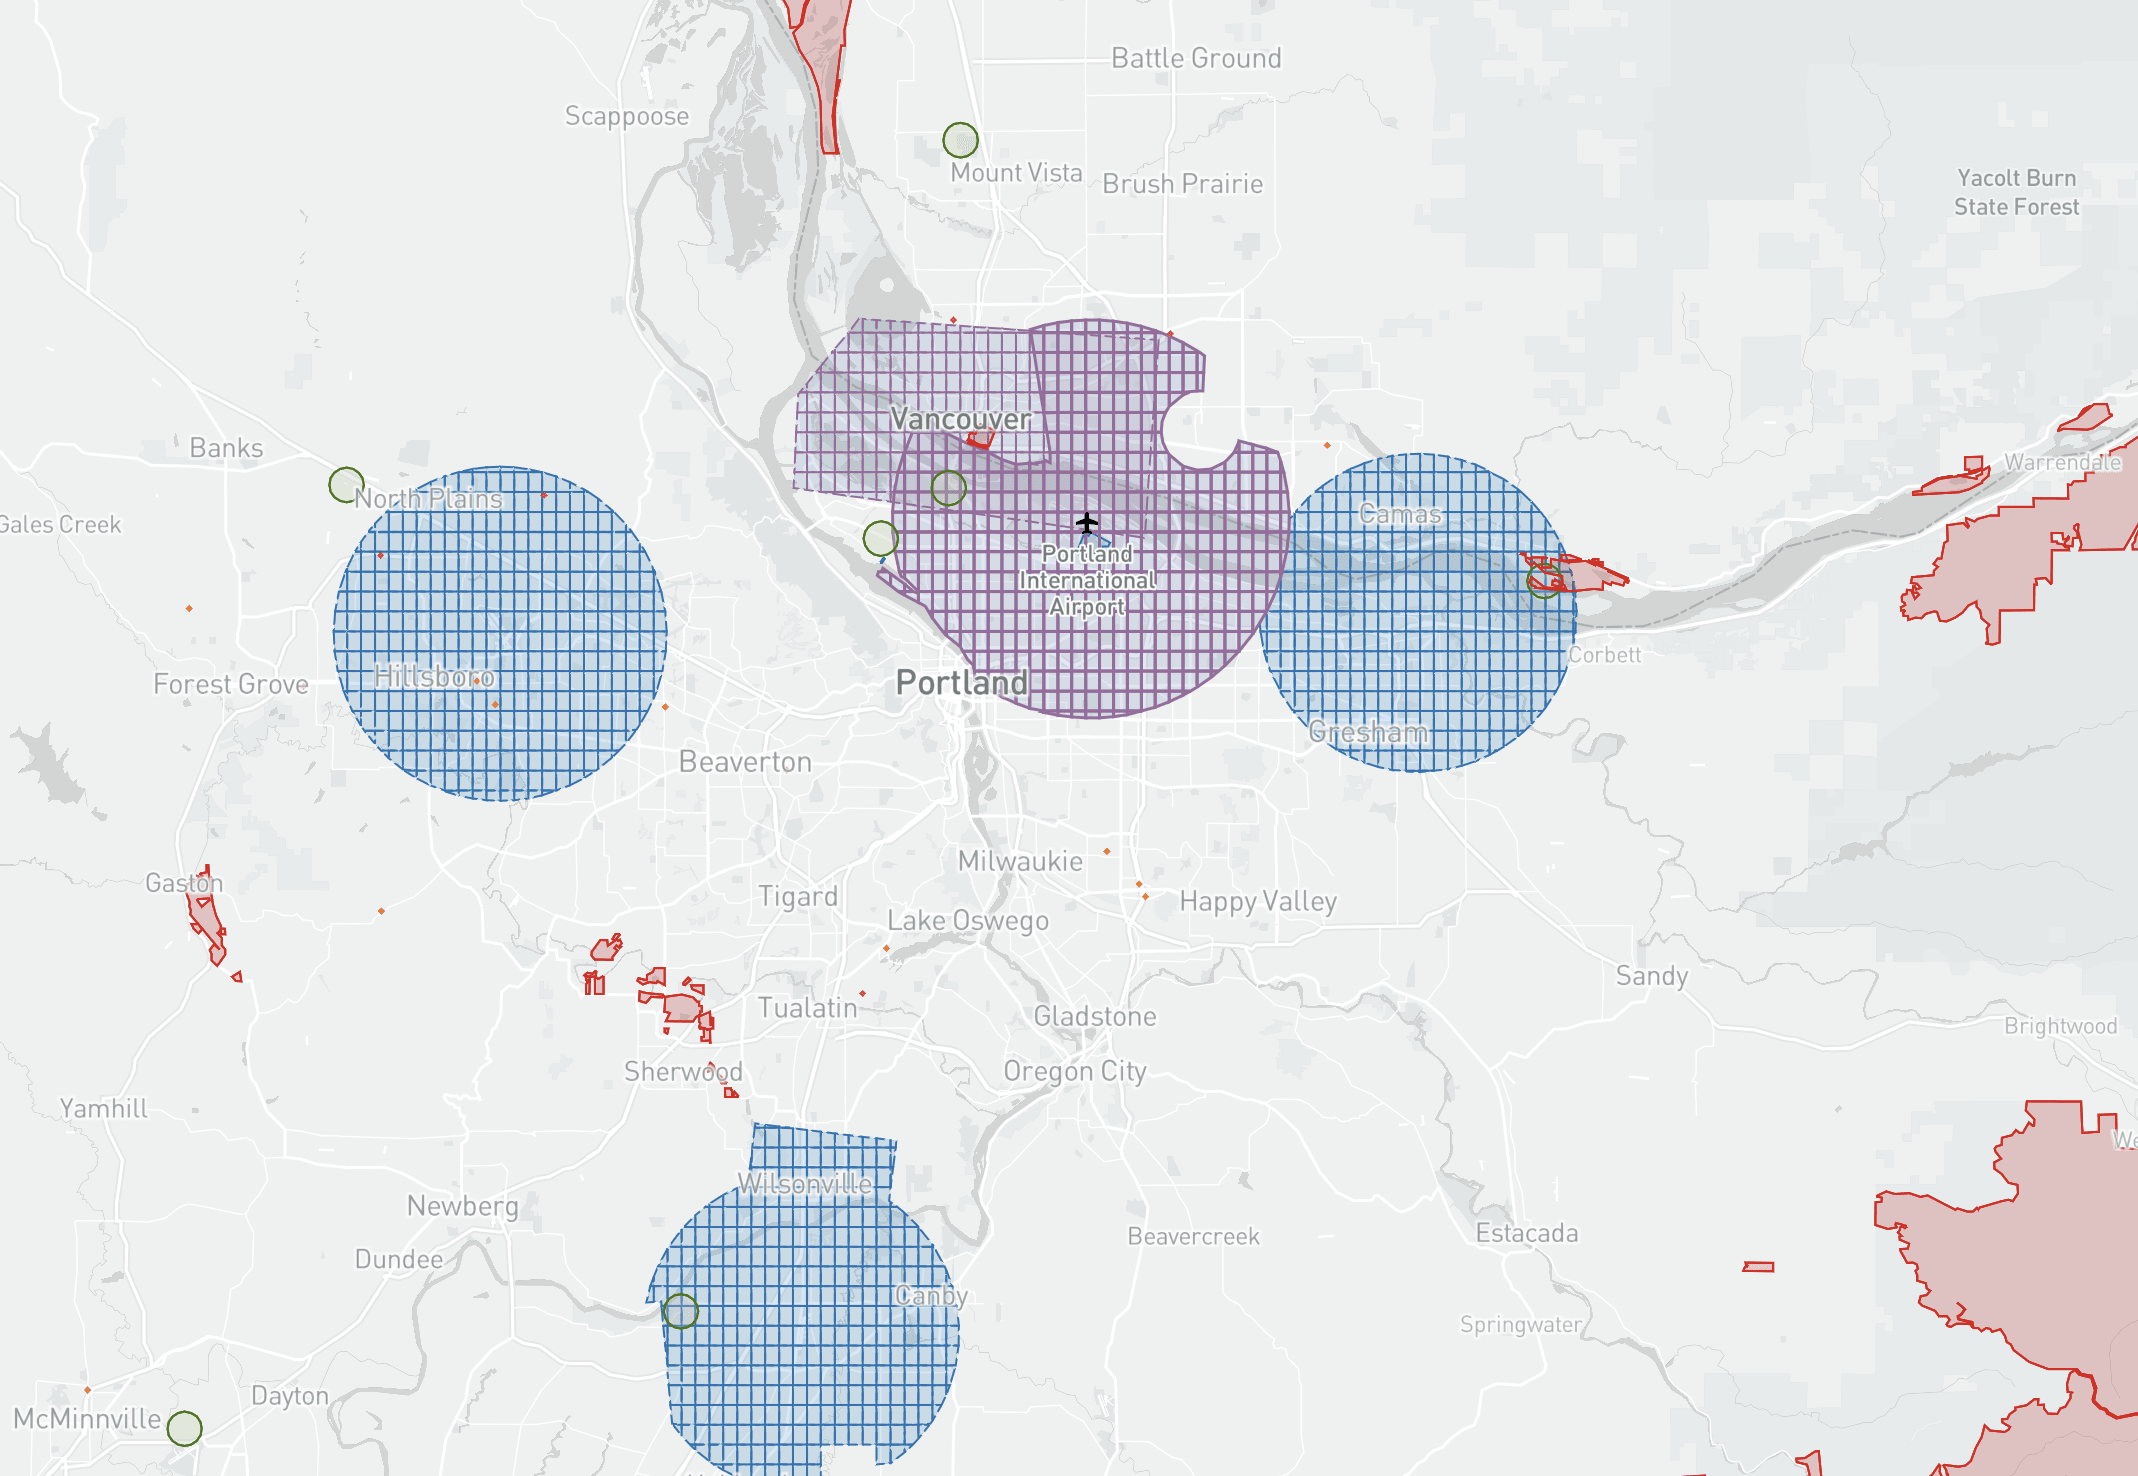 Map of Portland area flight restriction areas - For planning Aerial Video and Photography missions